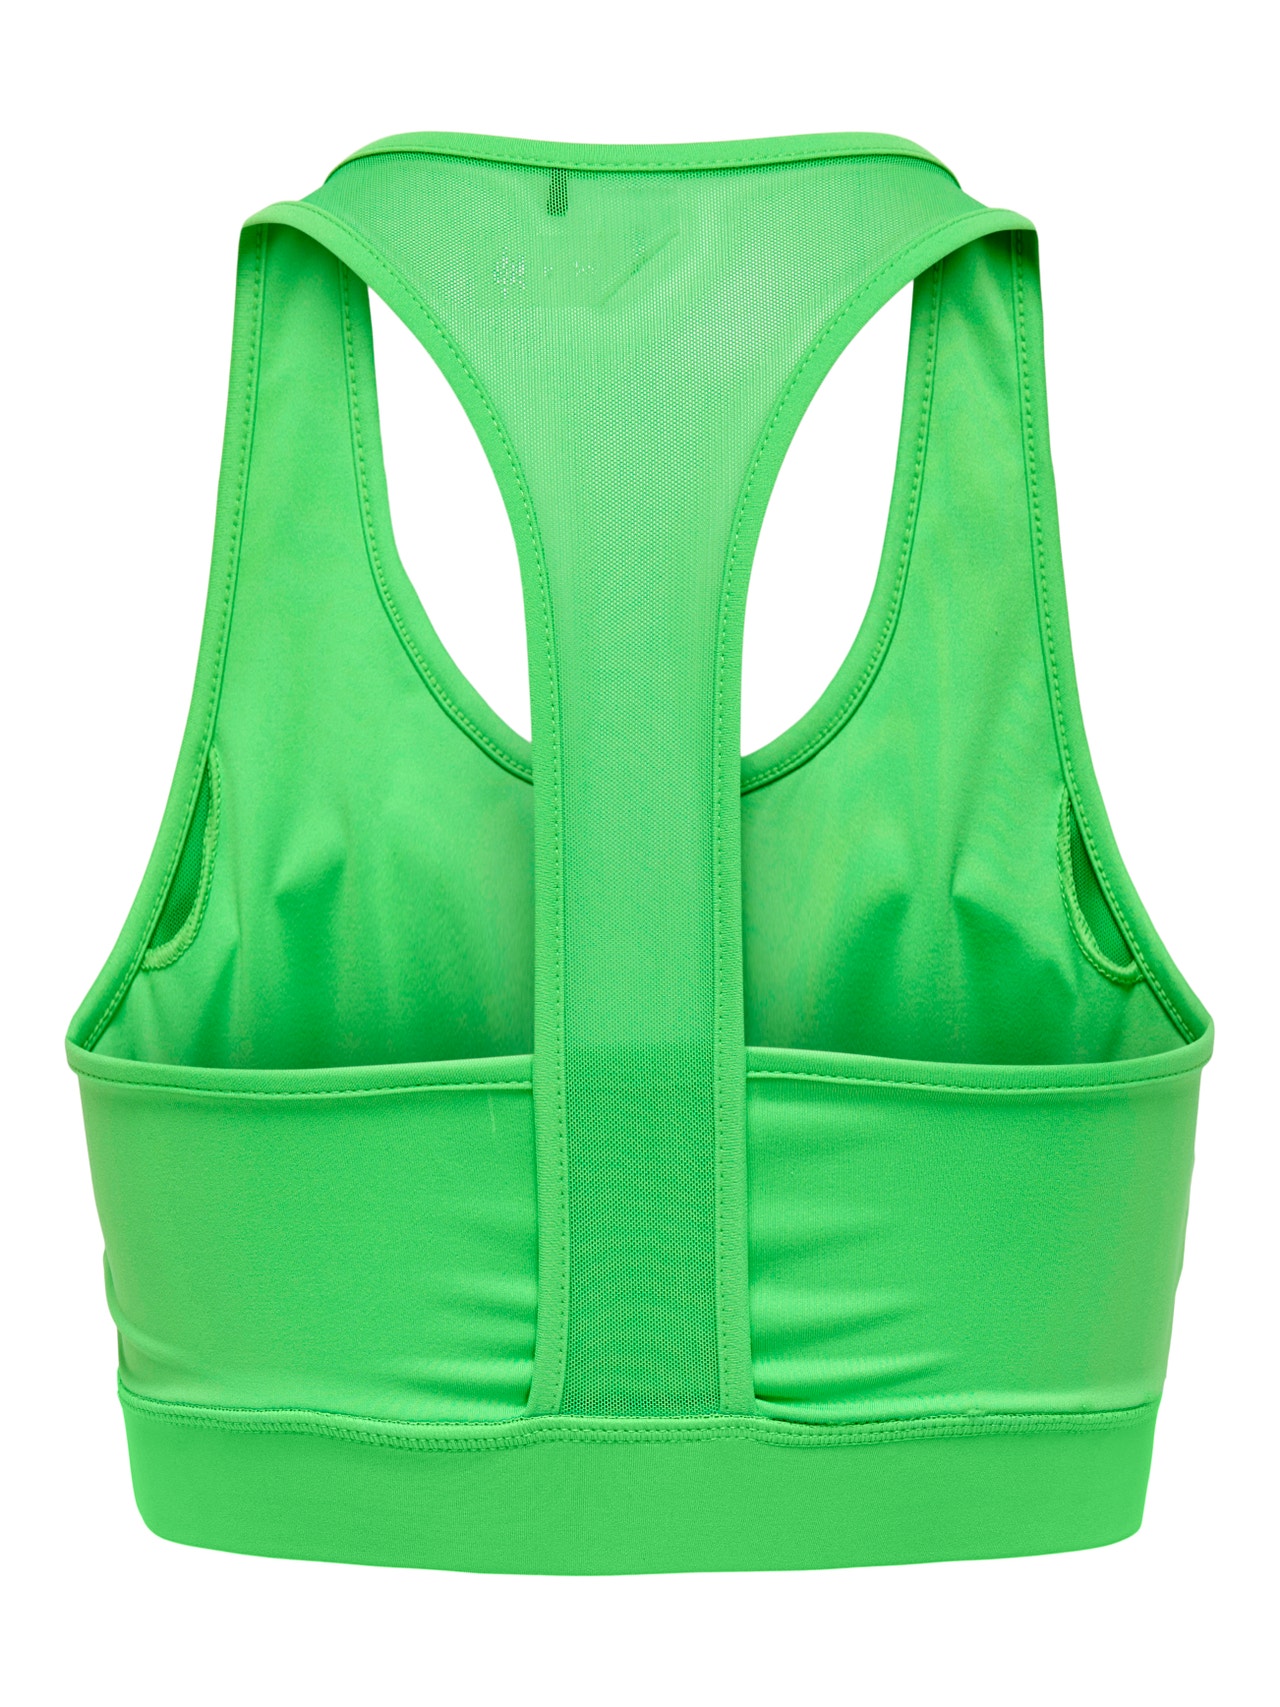 Racerback provides postural support Bras with 30 discount!